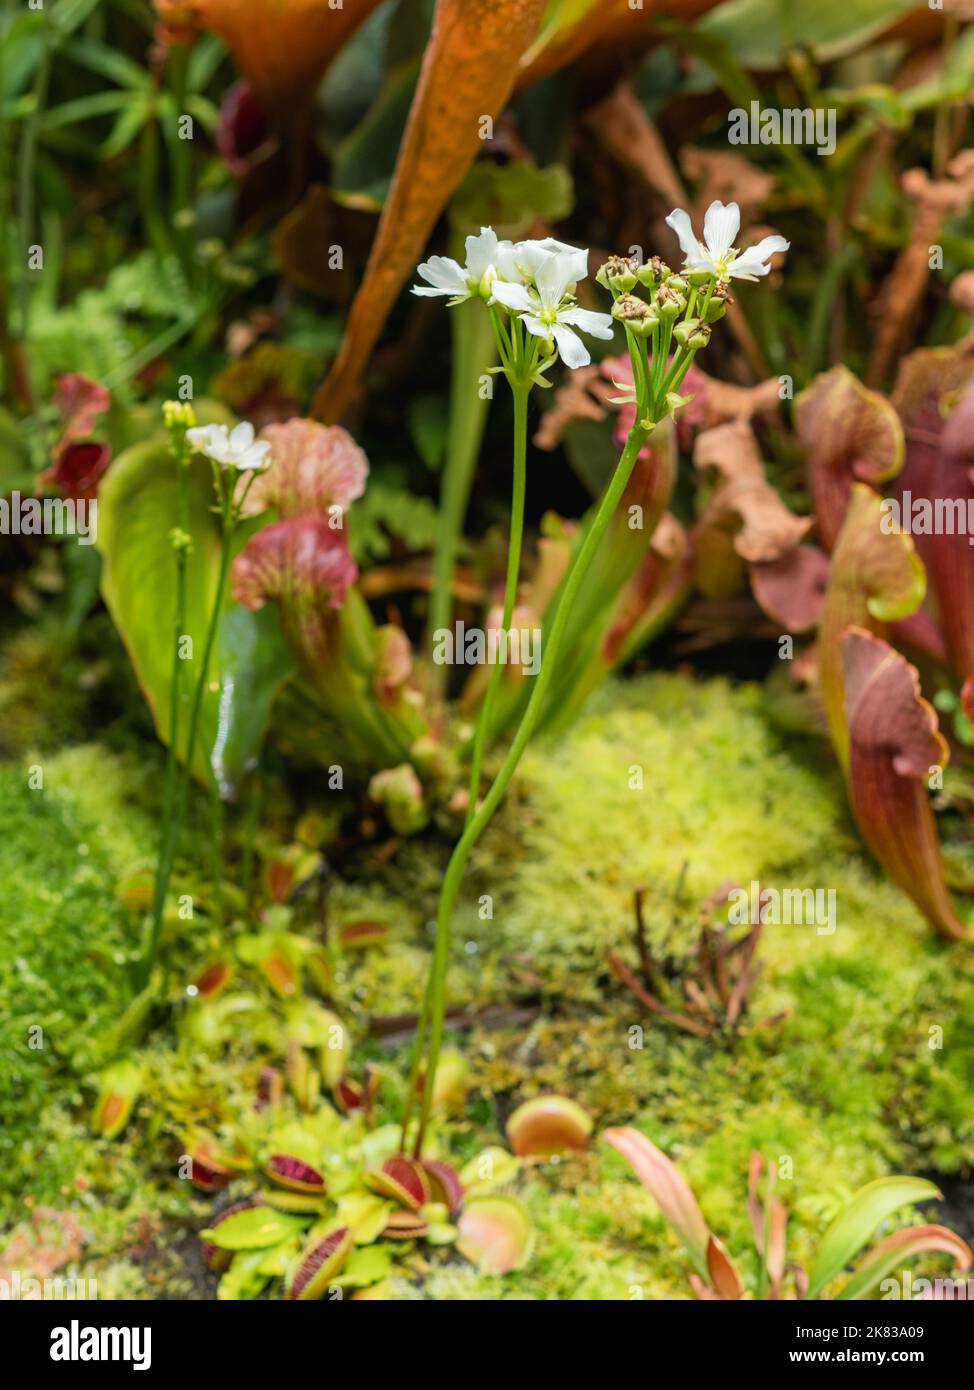 Venus flytrap or Dionaea muscipula. White flowers of blooming carnivorous plant. Stock Photo